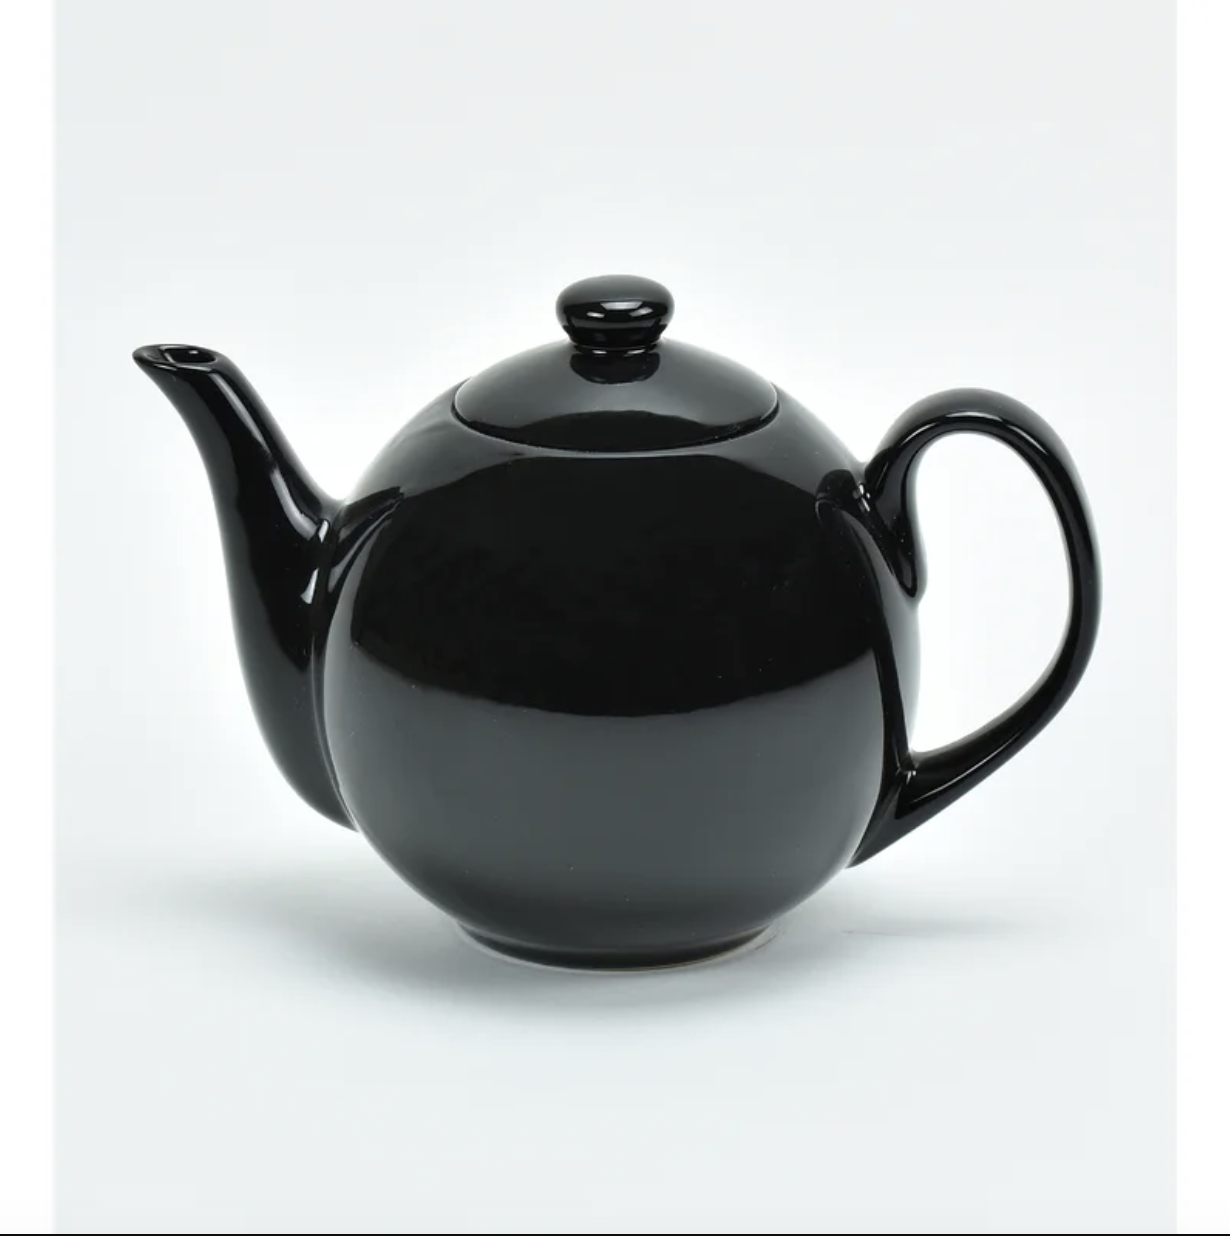 Lillkin Teapot with Infuser